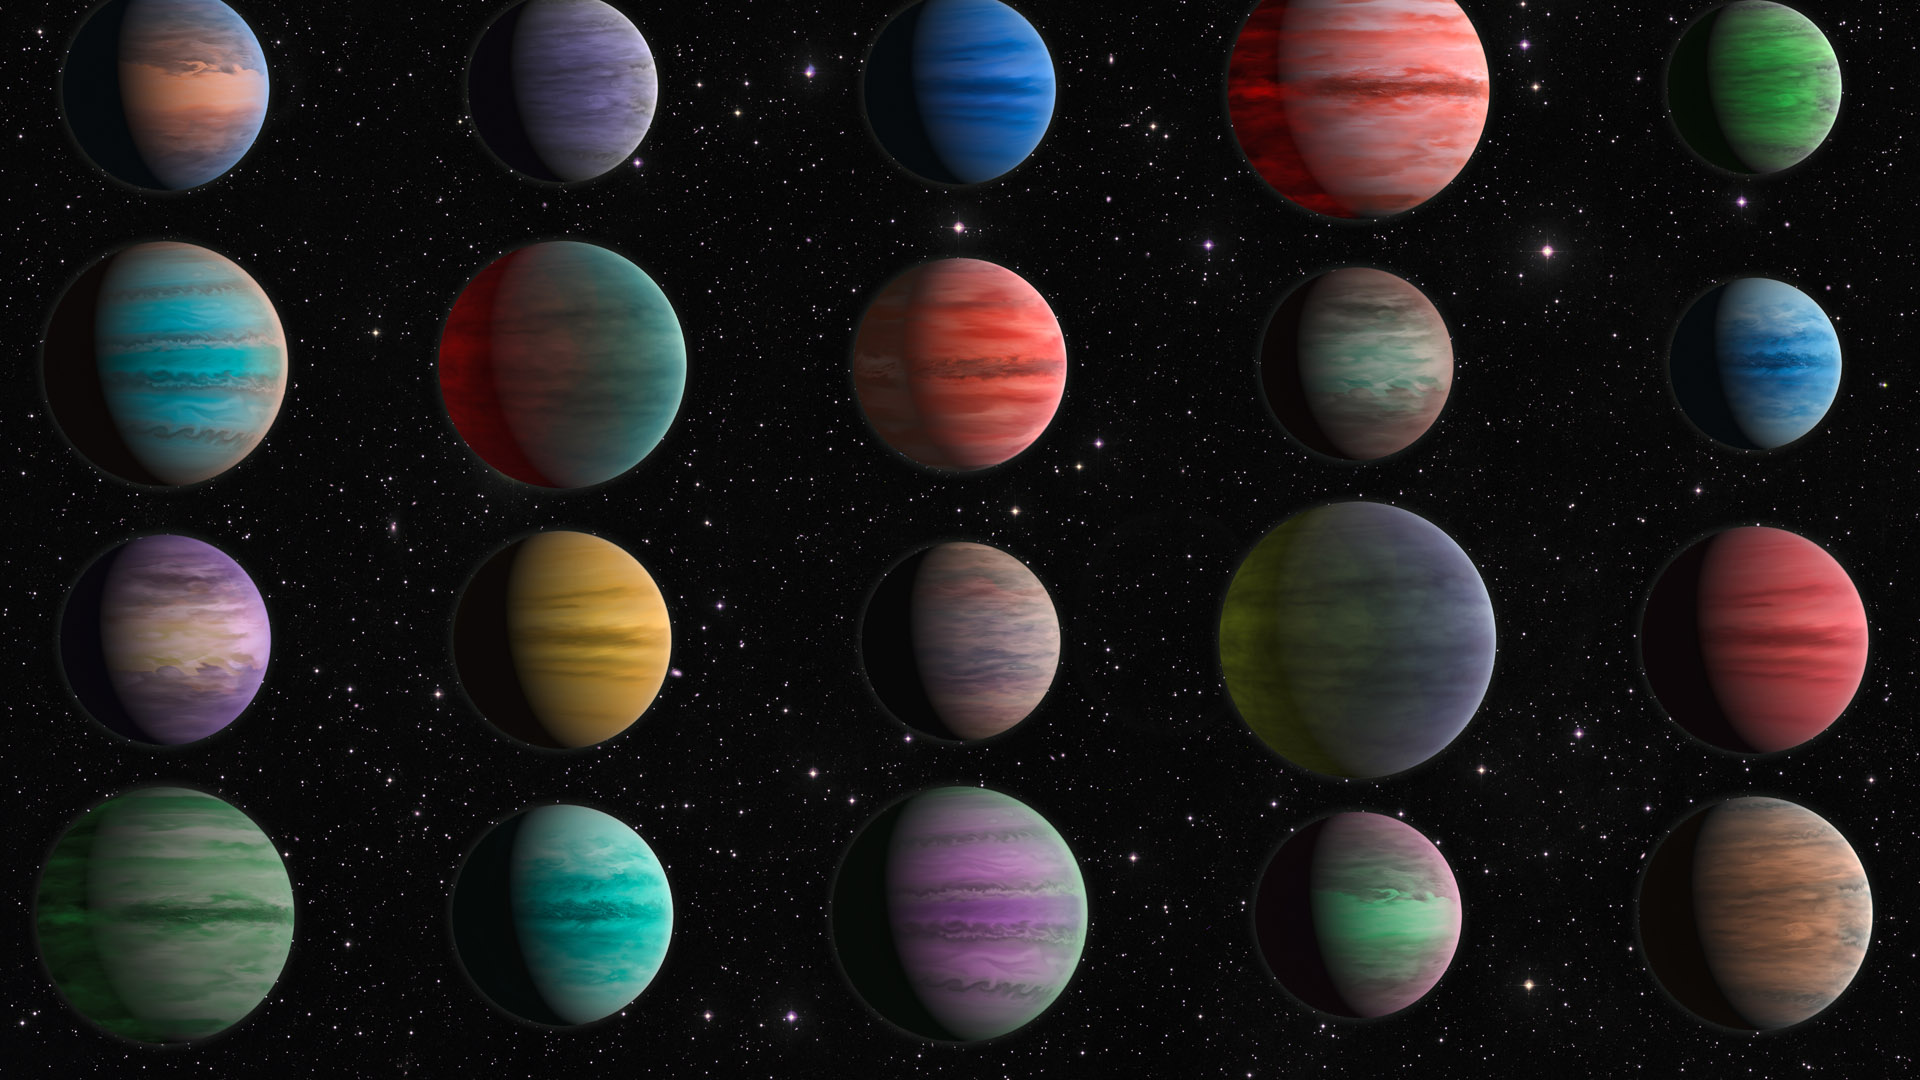 Daily News | Online News a grid view of various exoplanet artistic illustrations